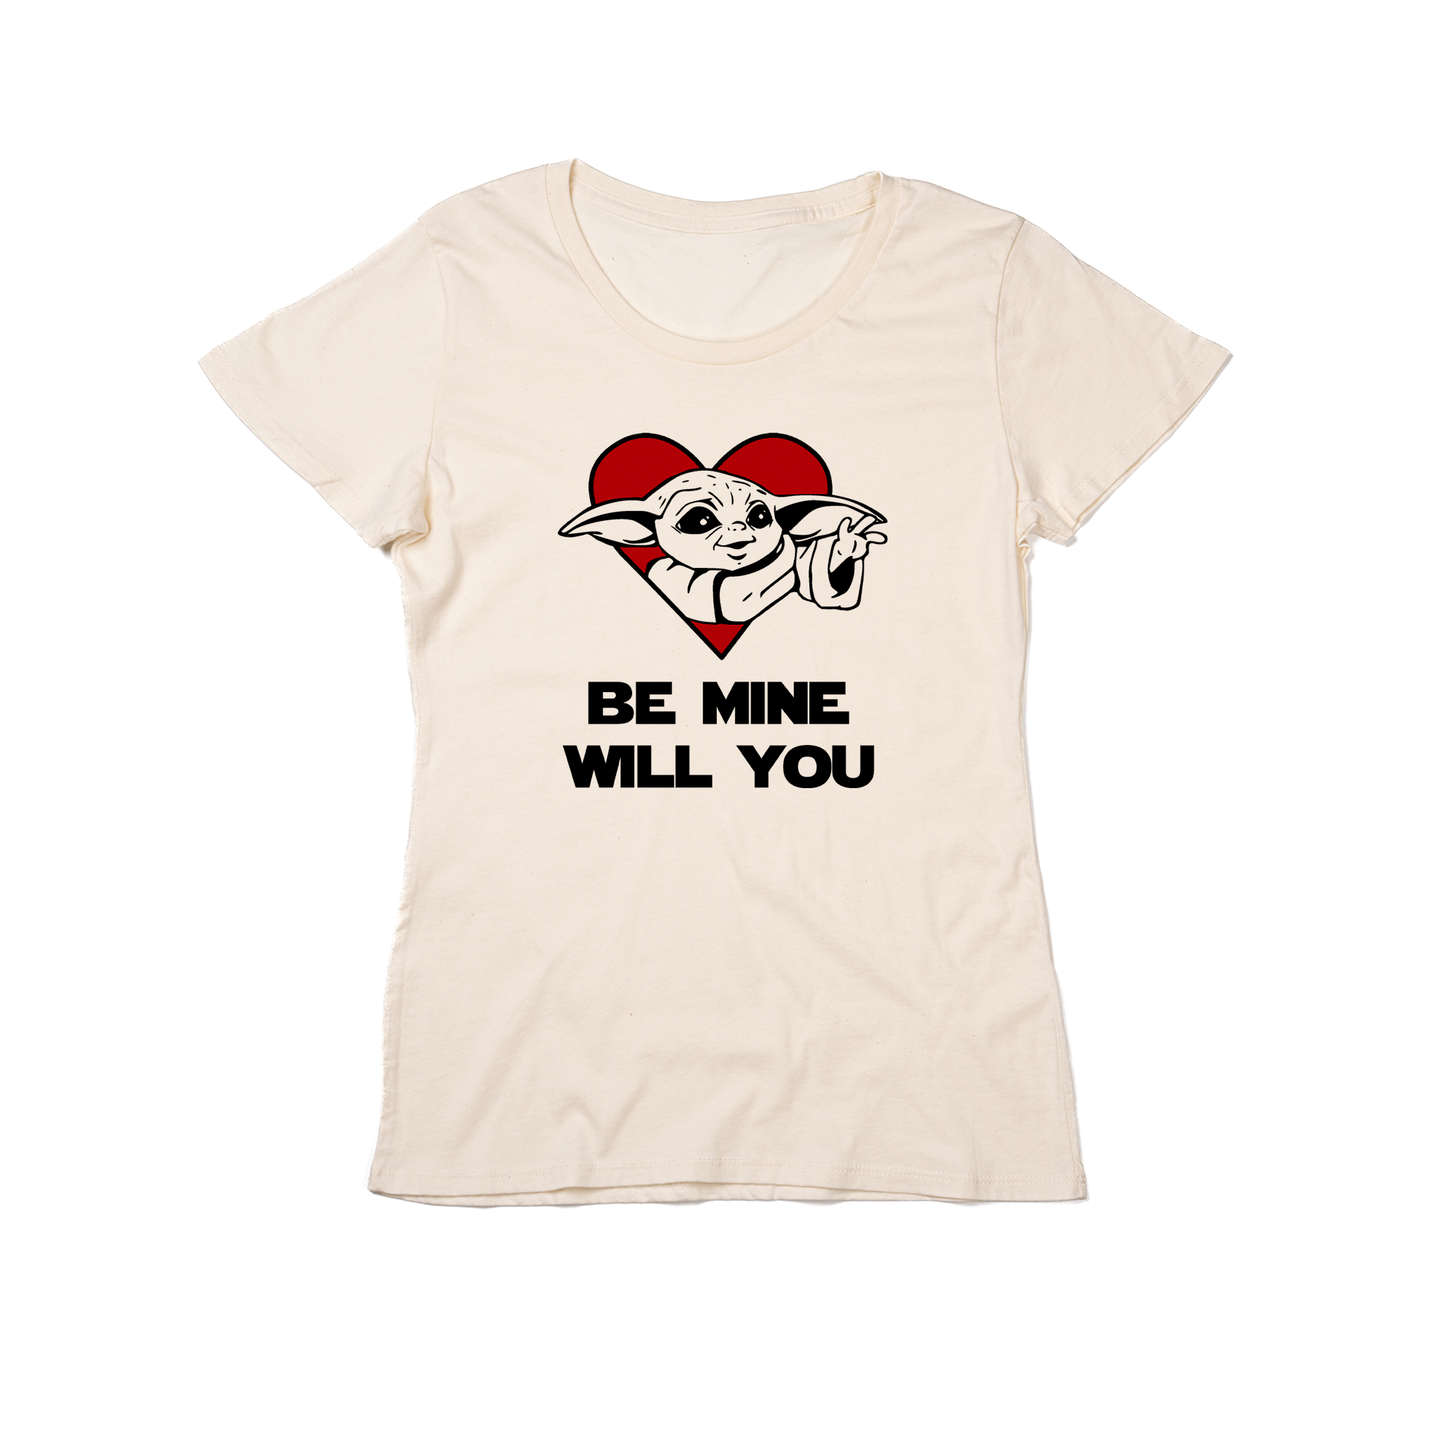 Be Mine Will You (Baby Yoda Inspired, Across Front) - Women's Fitted Tee (Natural)